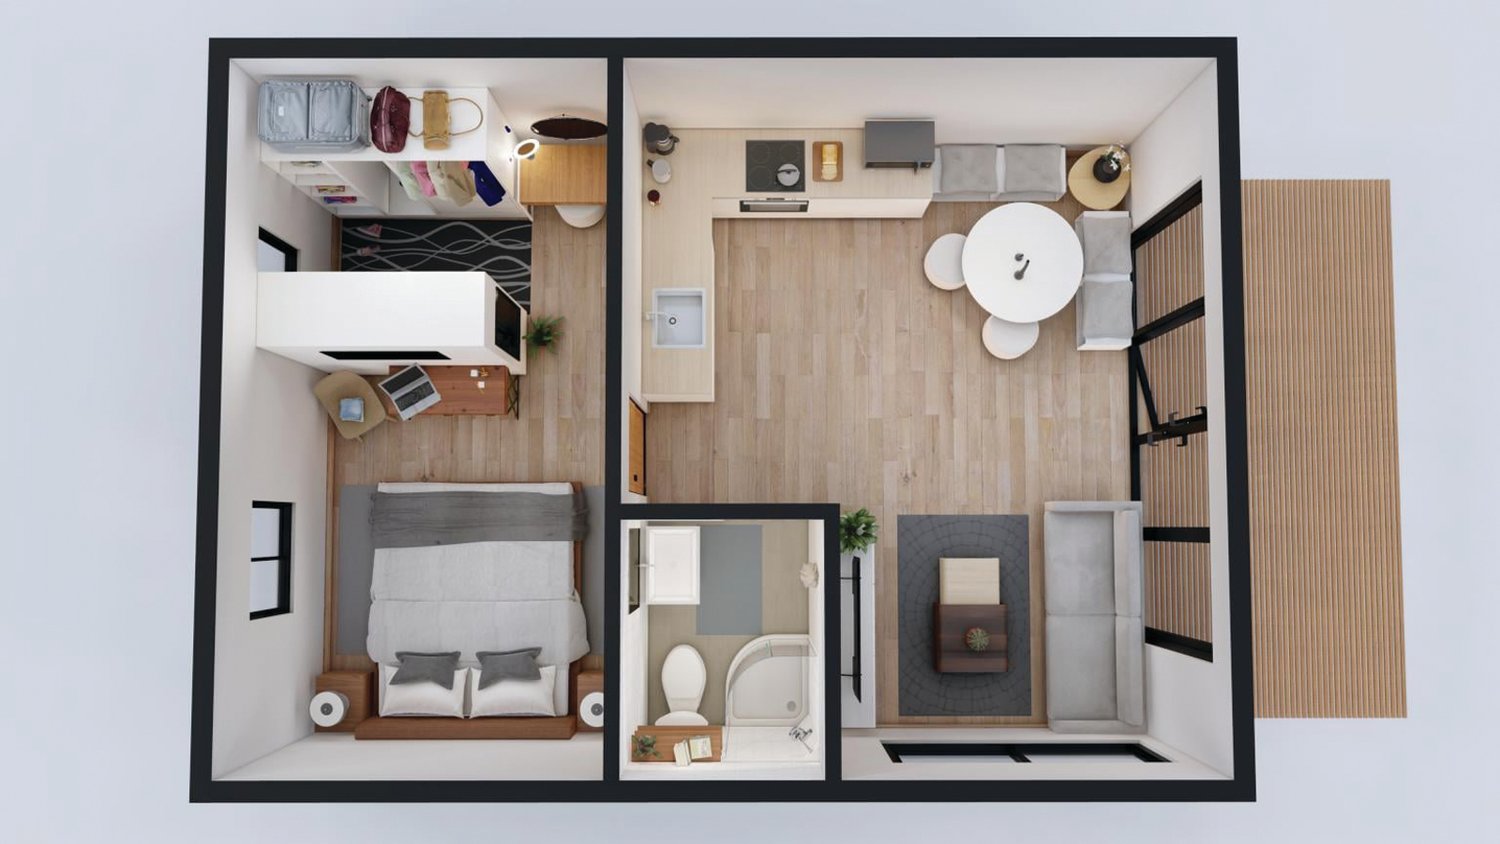 BIG LIVING IN A SMALL SPACE: A bird’s eye view of the floor plan of a Rohe Lotus tiny home. 800